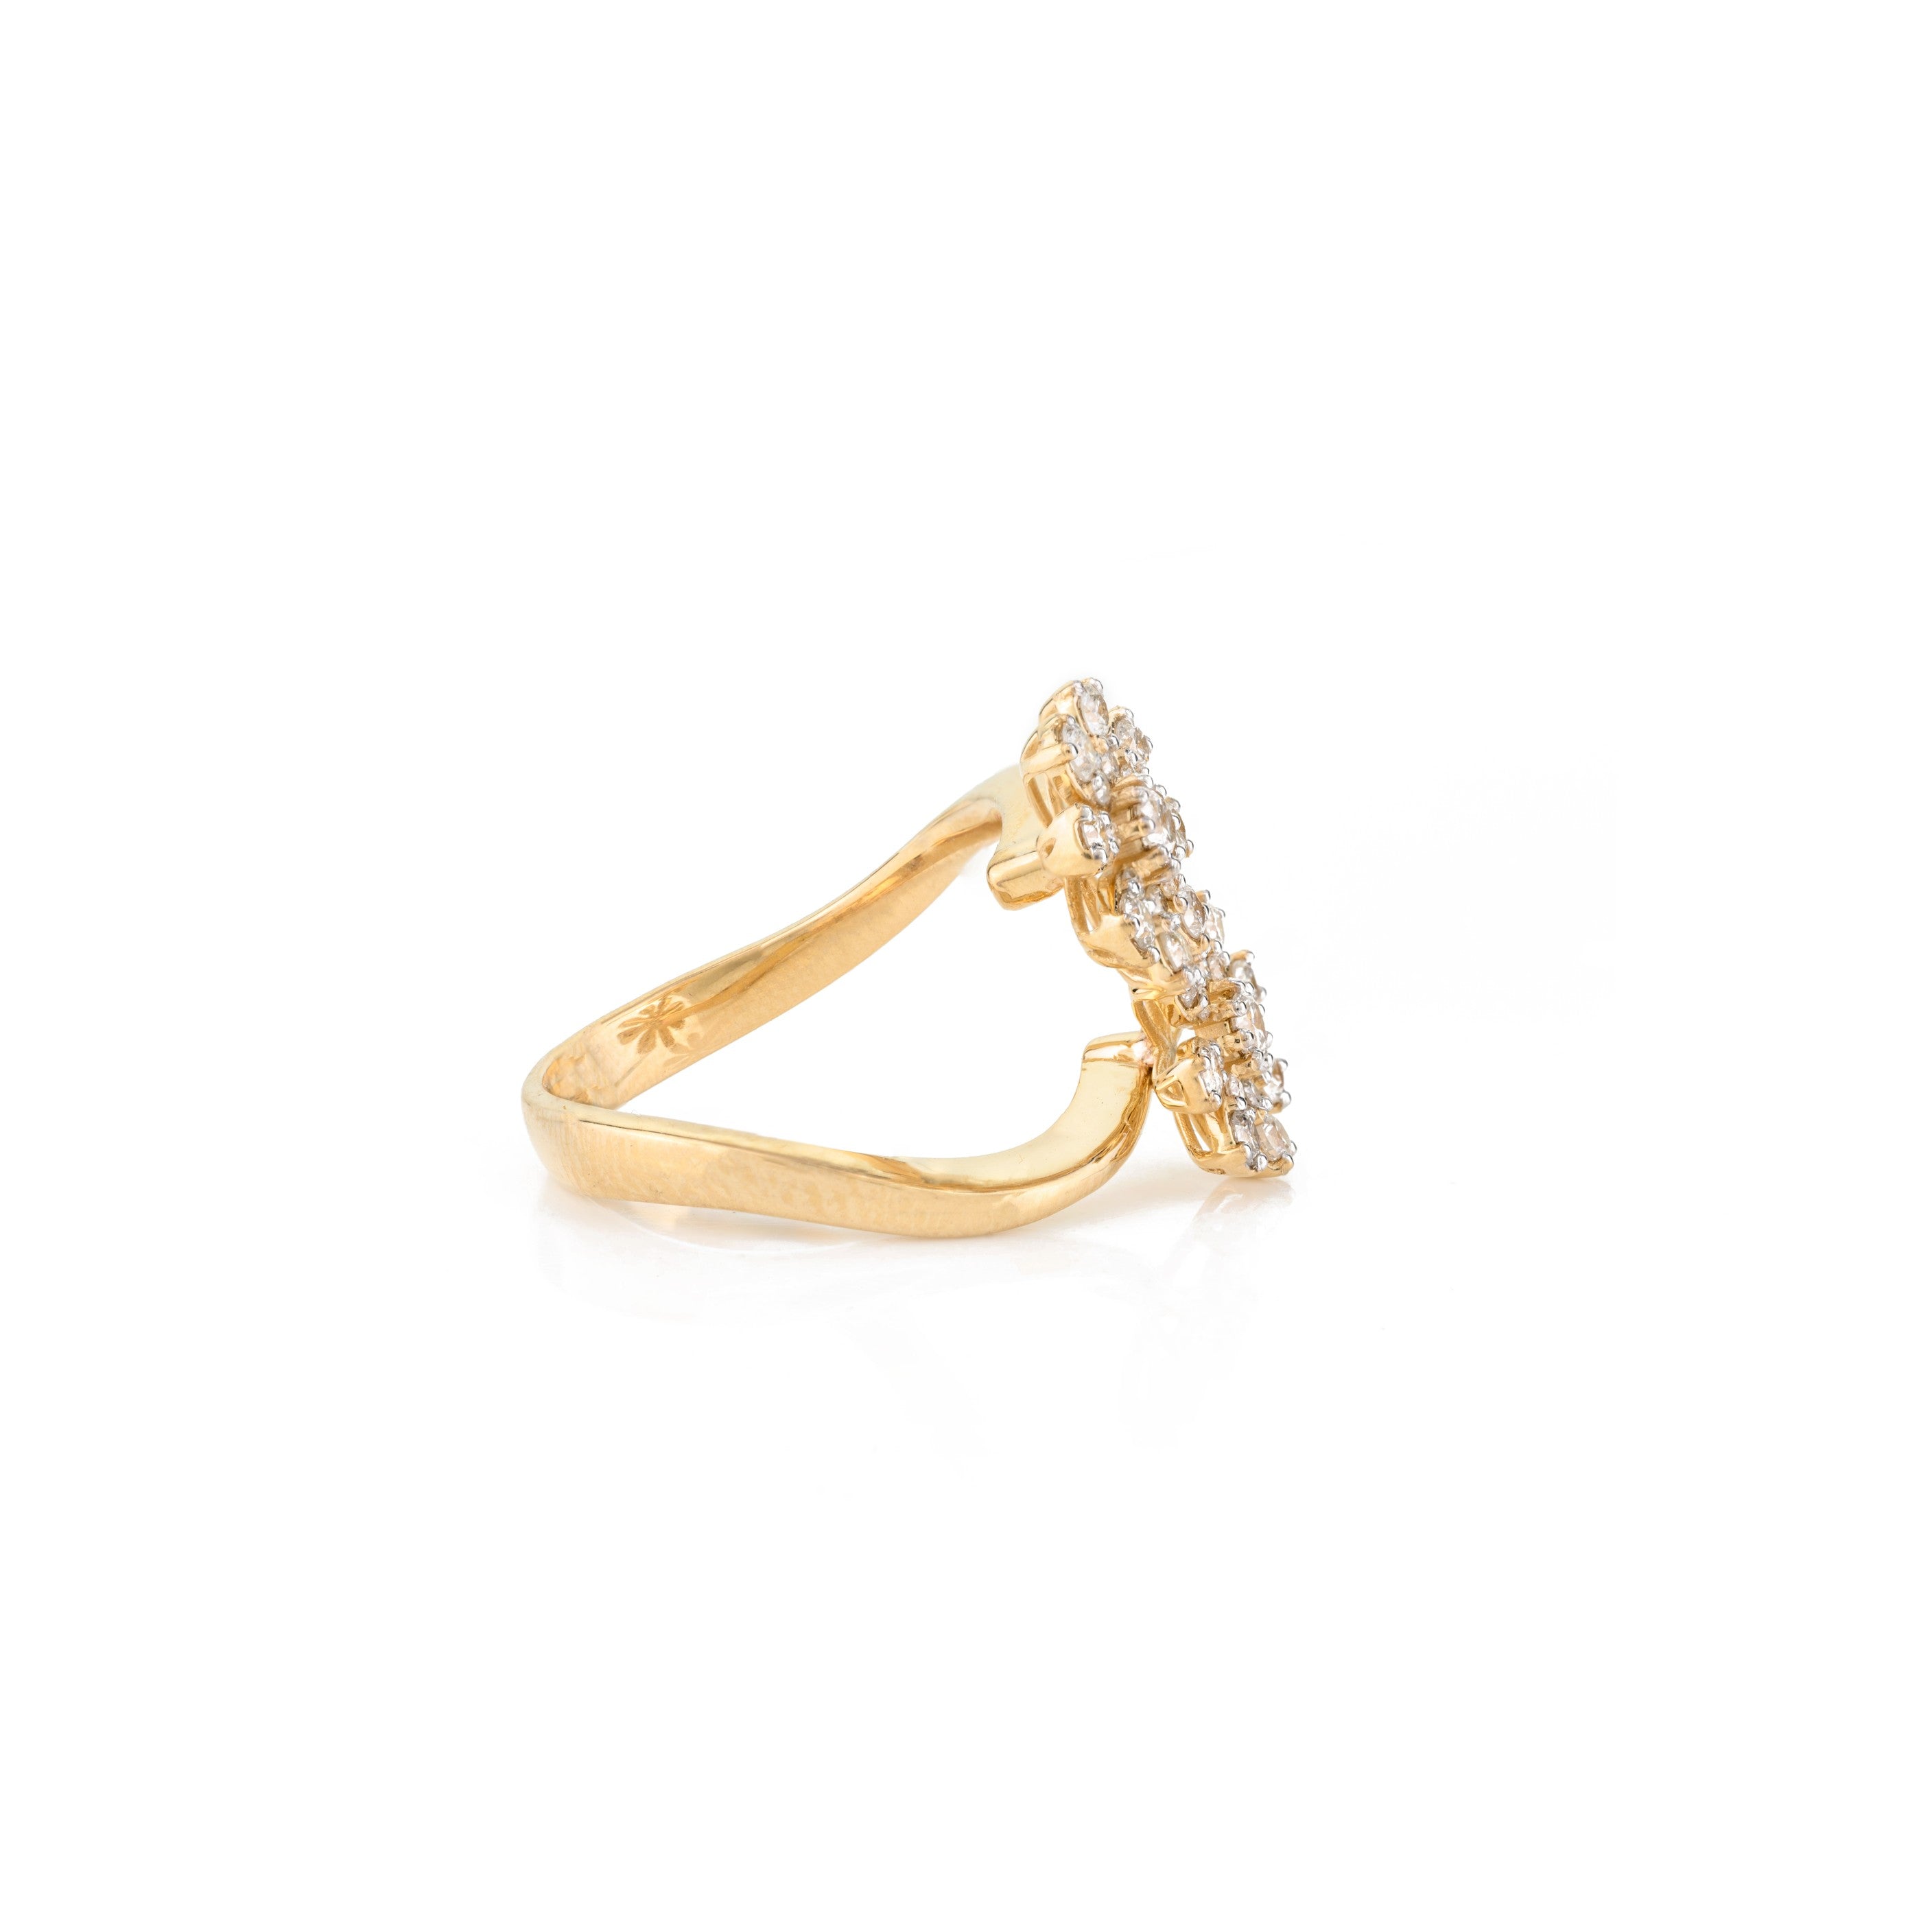 Diamond Flower By Pass Ring in 18k Yellow Gold